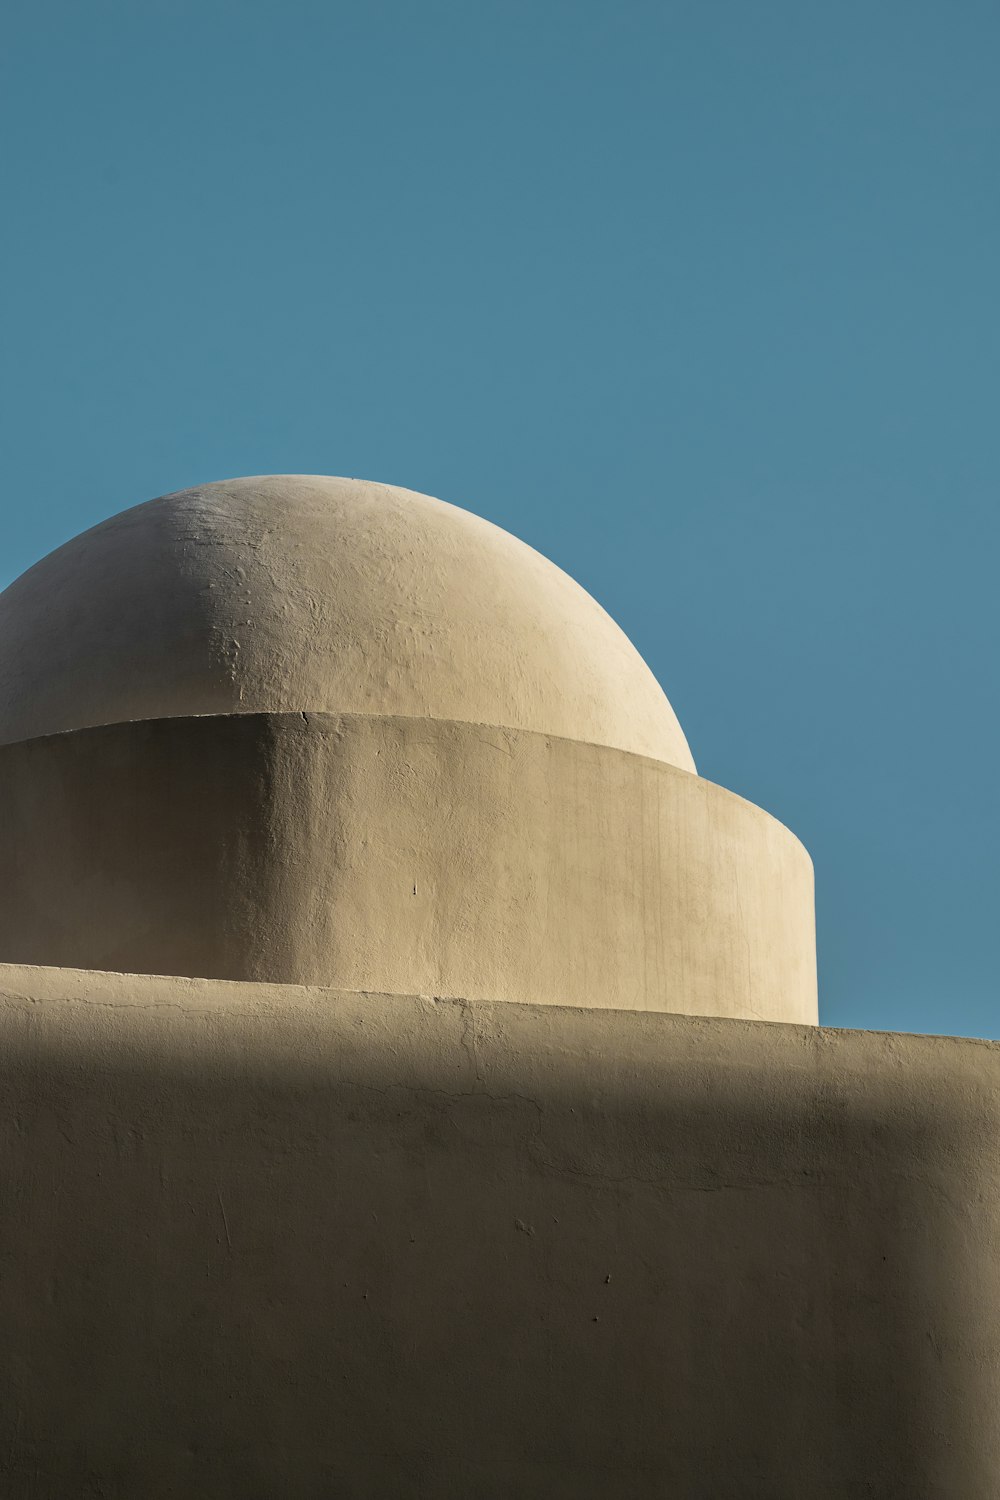 a dome on top of a building against a blue sky